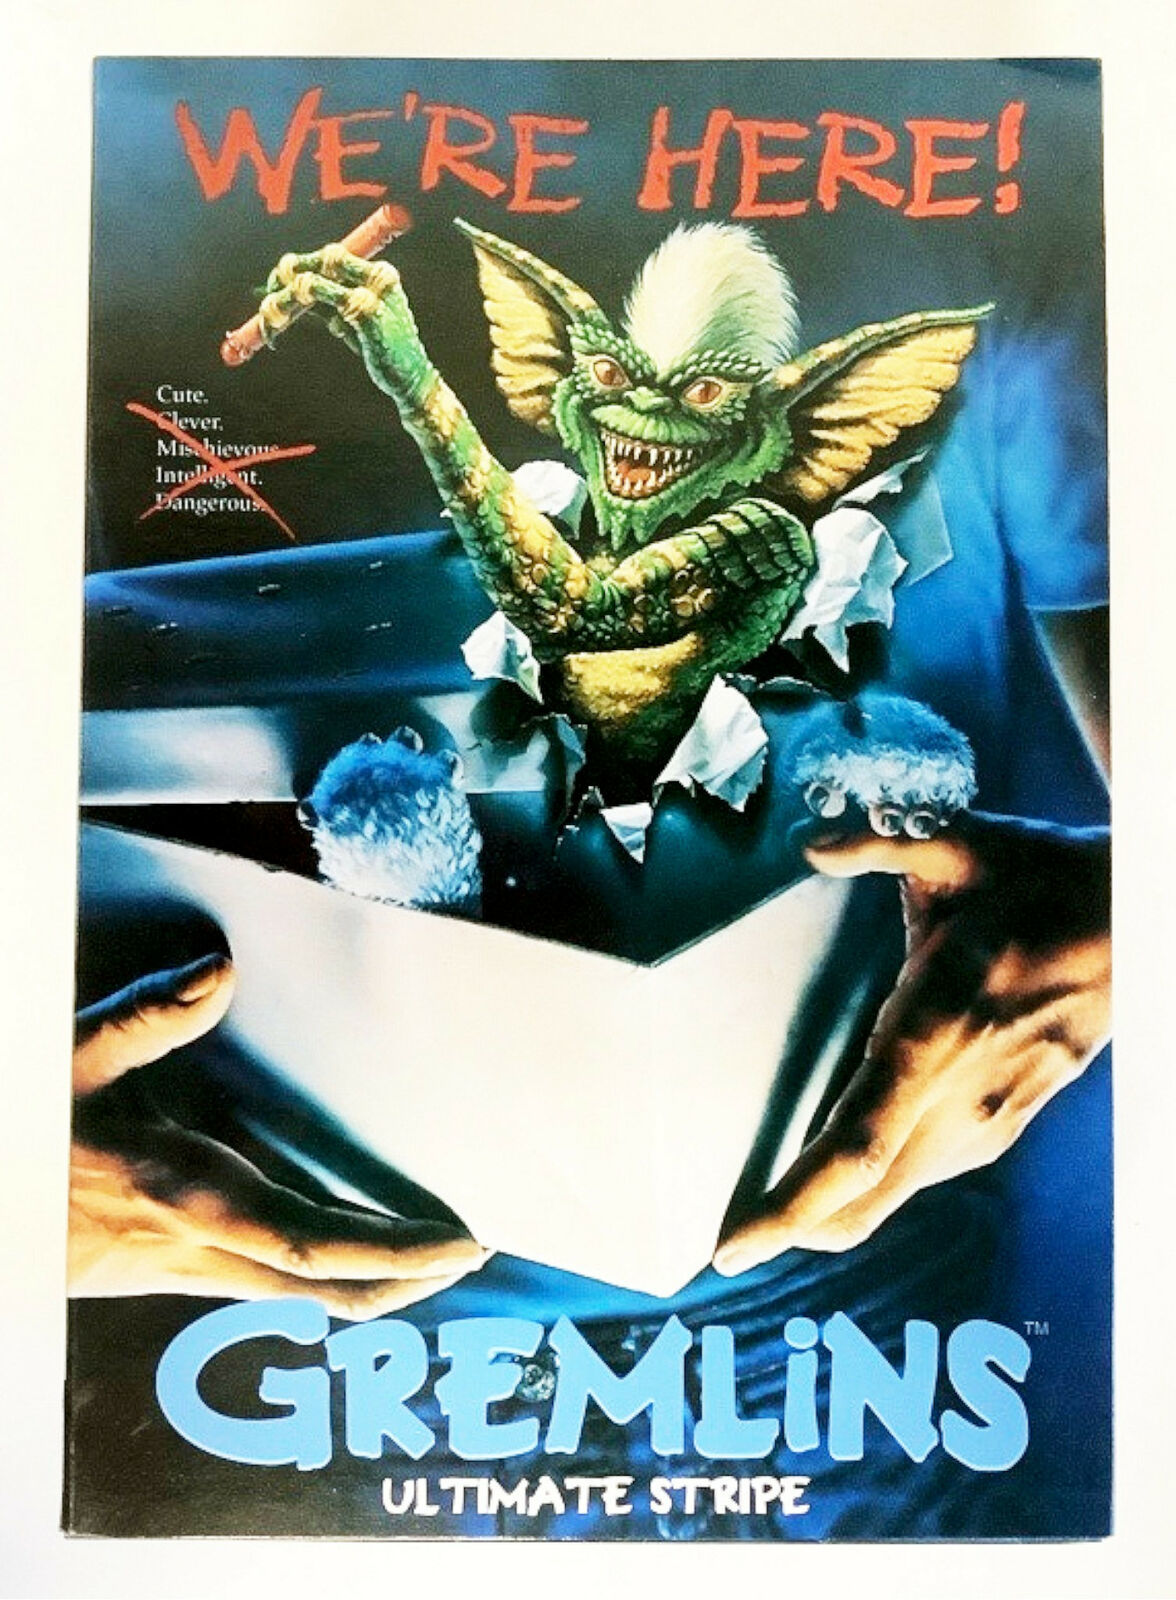 Primary image for NEW NECA 30754 Gremlins Ultimate STRIPE 7-Inch Scale Action Figure mohawk